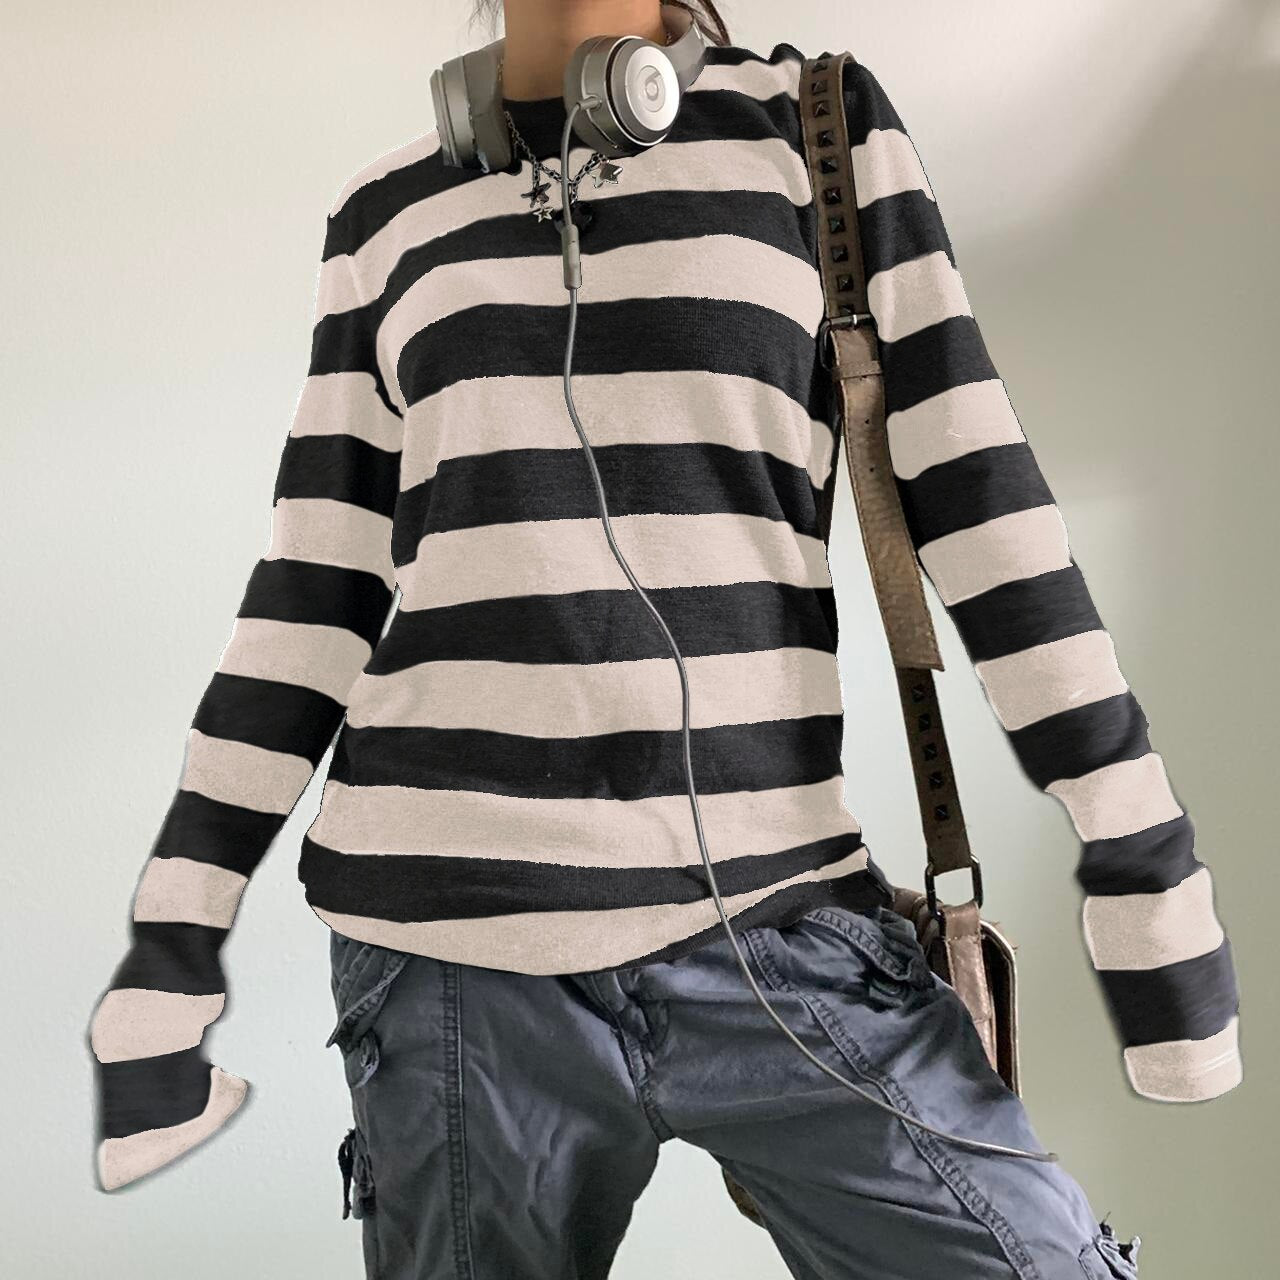 Fairy Grunge Knit Shirt - Kawaii Stop - Autumn, Basic, Black, Emo, Fairy, Grey, Grunge, Knit, Long, Neck, Round, Shirt, Sleeve, Striped, Sweaters, Tee, Tops, Tops &amp; Tees, Women, Women's Clothing &amp; Accessories, Y2k